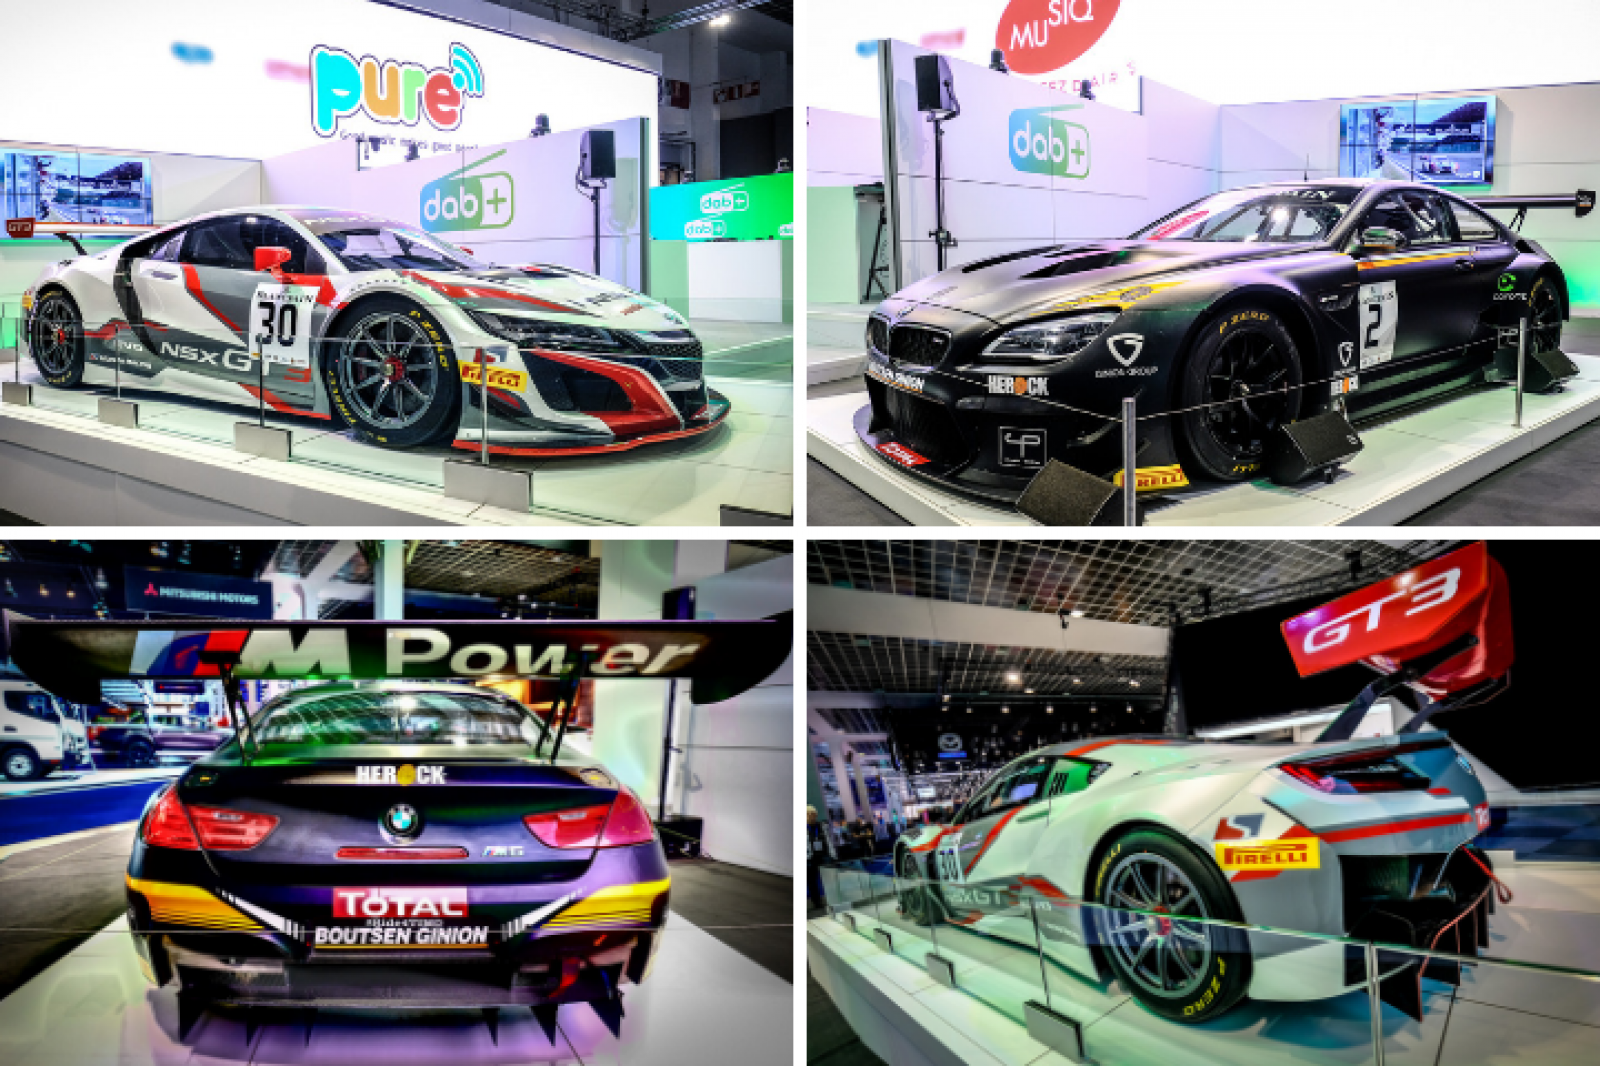 Total 24 Hours of Spa and RTBF put GT3 machinery on display at Brussels Motor Show